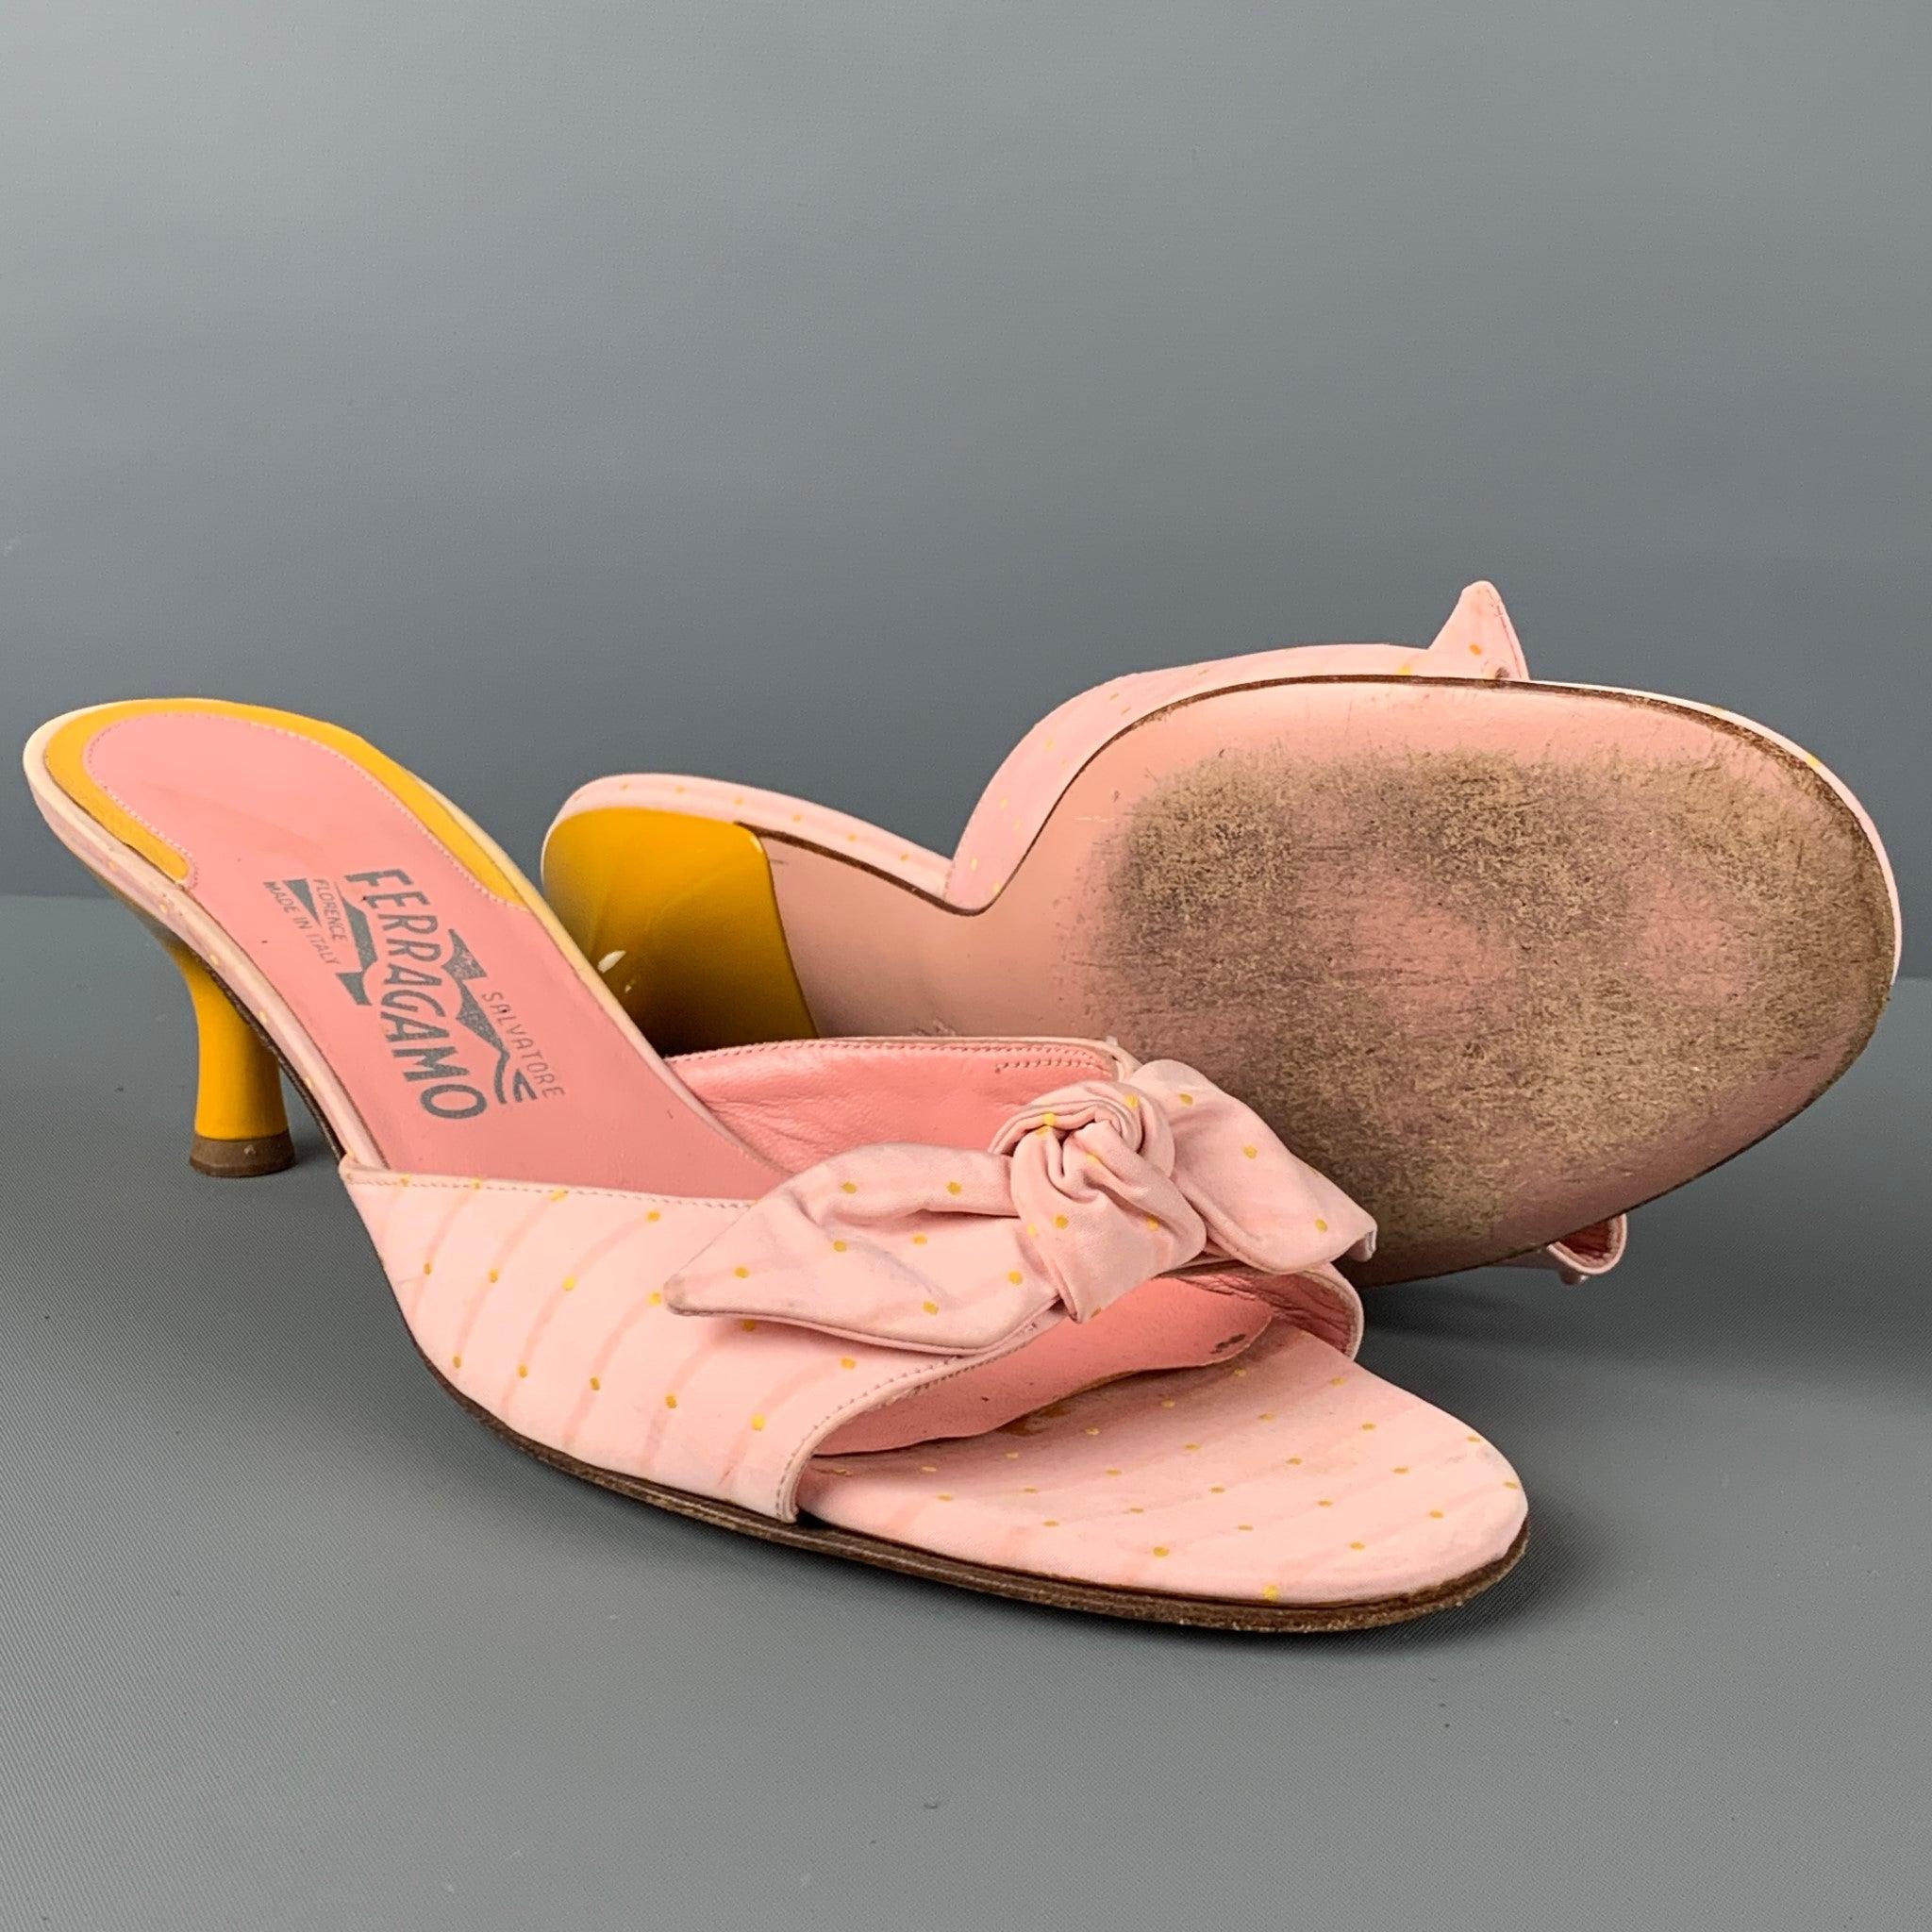 SALVATORE FERRAGAMO Size 9 Pink Leather Yellow Kitten Heel Sandals In Good Condition For Sale In San Francisco, CA